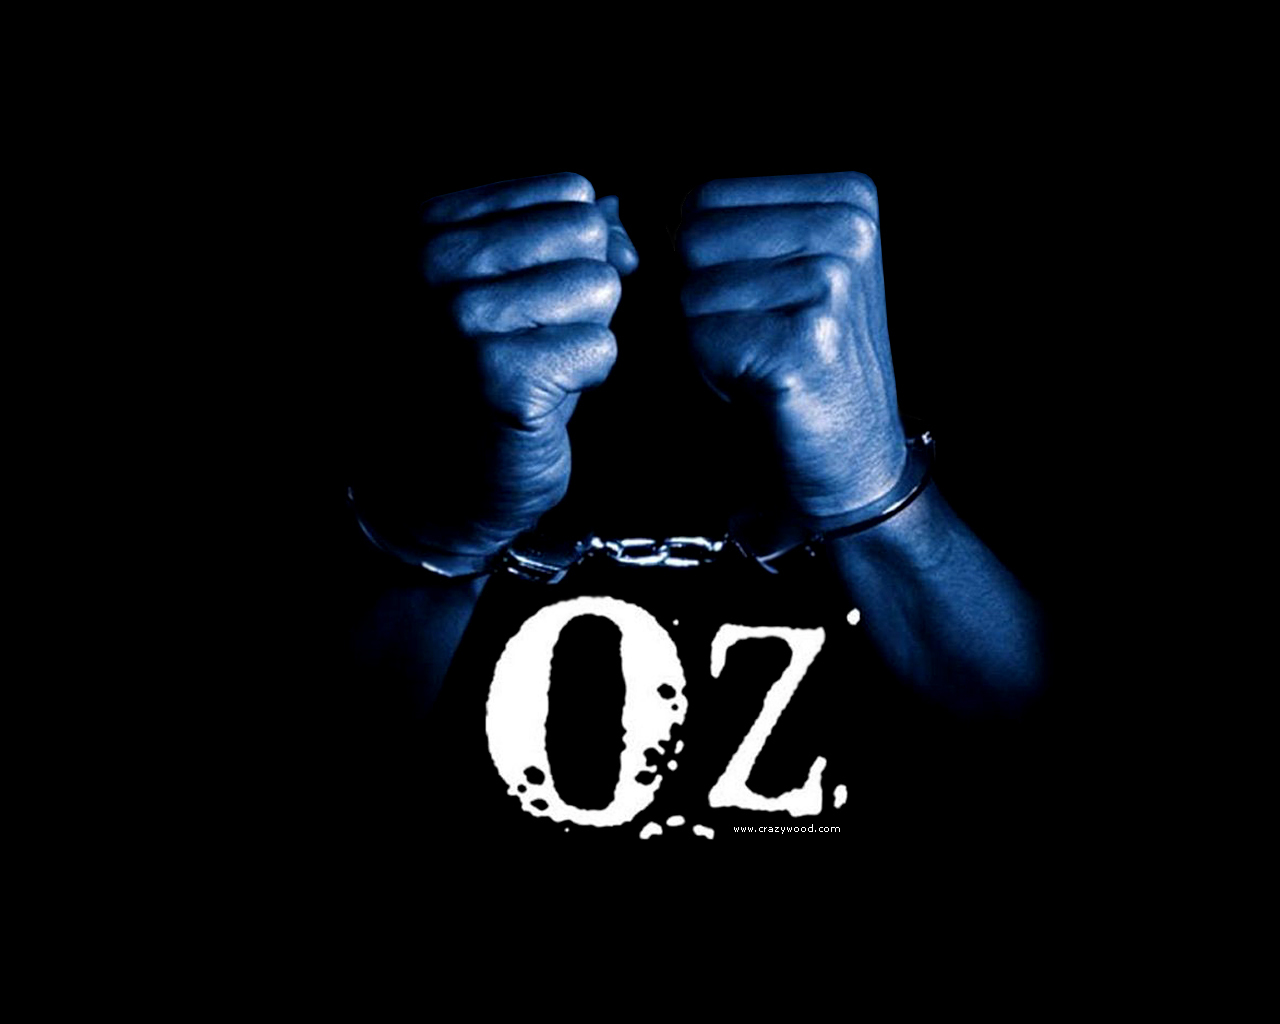 Oz - Oz It's No Place Like Home , HD Wallpaper & Backgrounds